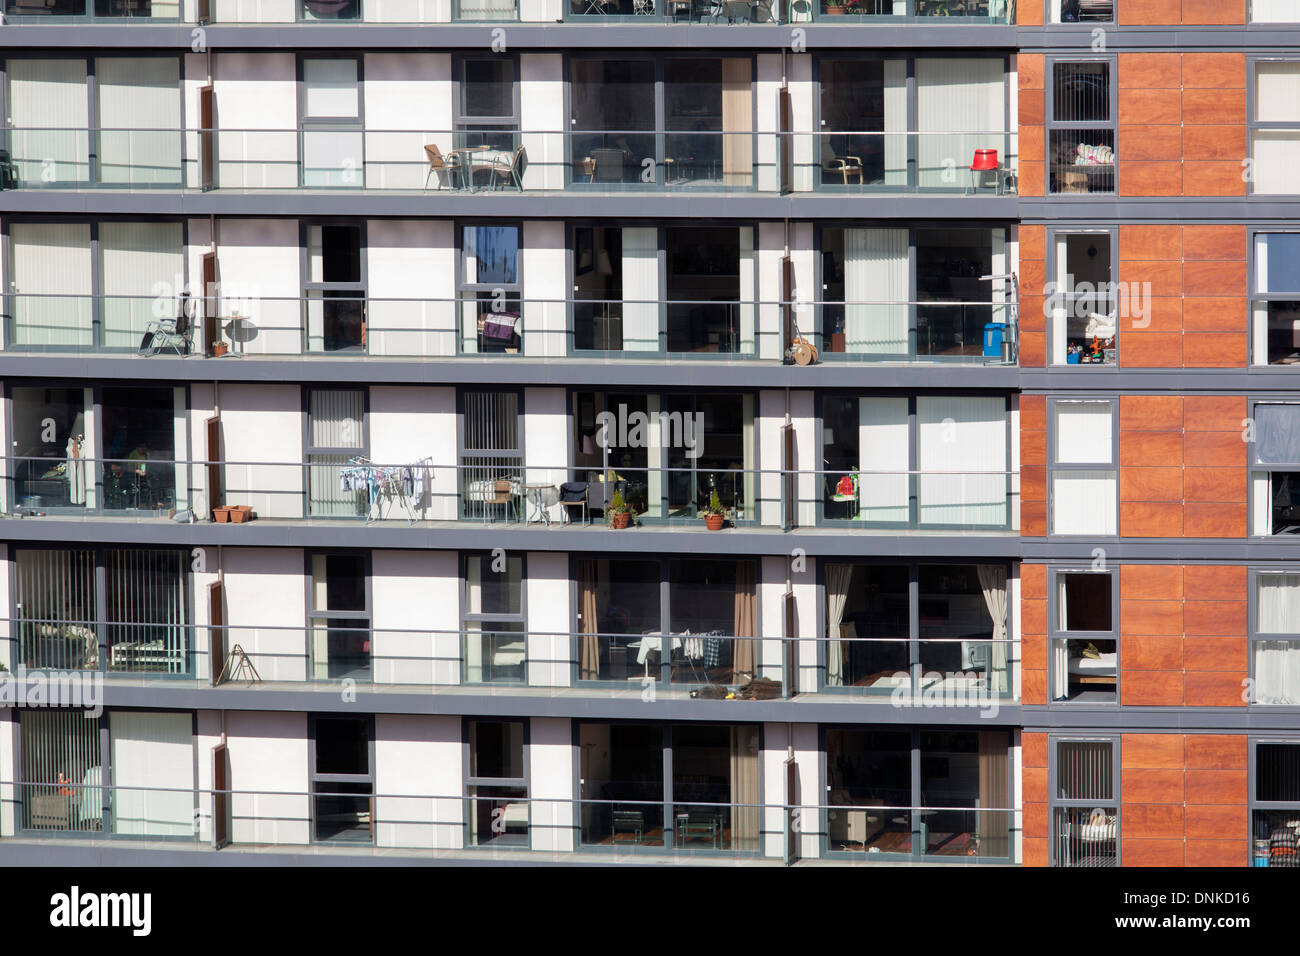 A close up view of some of the apartments and balconies of the NV buildings in Salford Quays Stock Photo